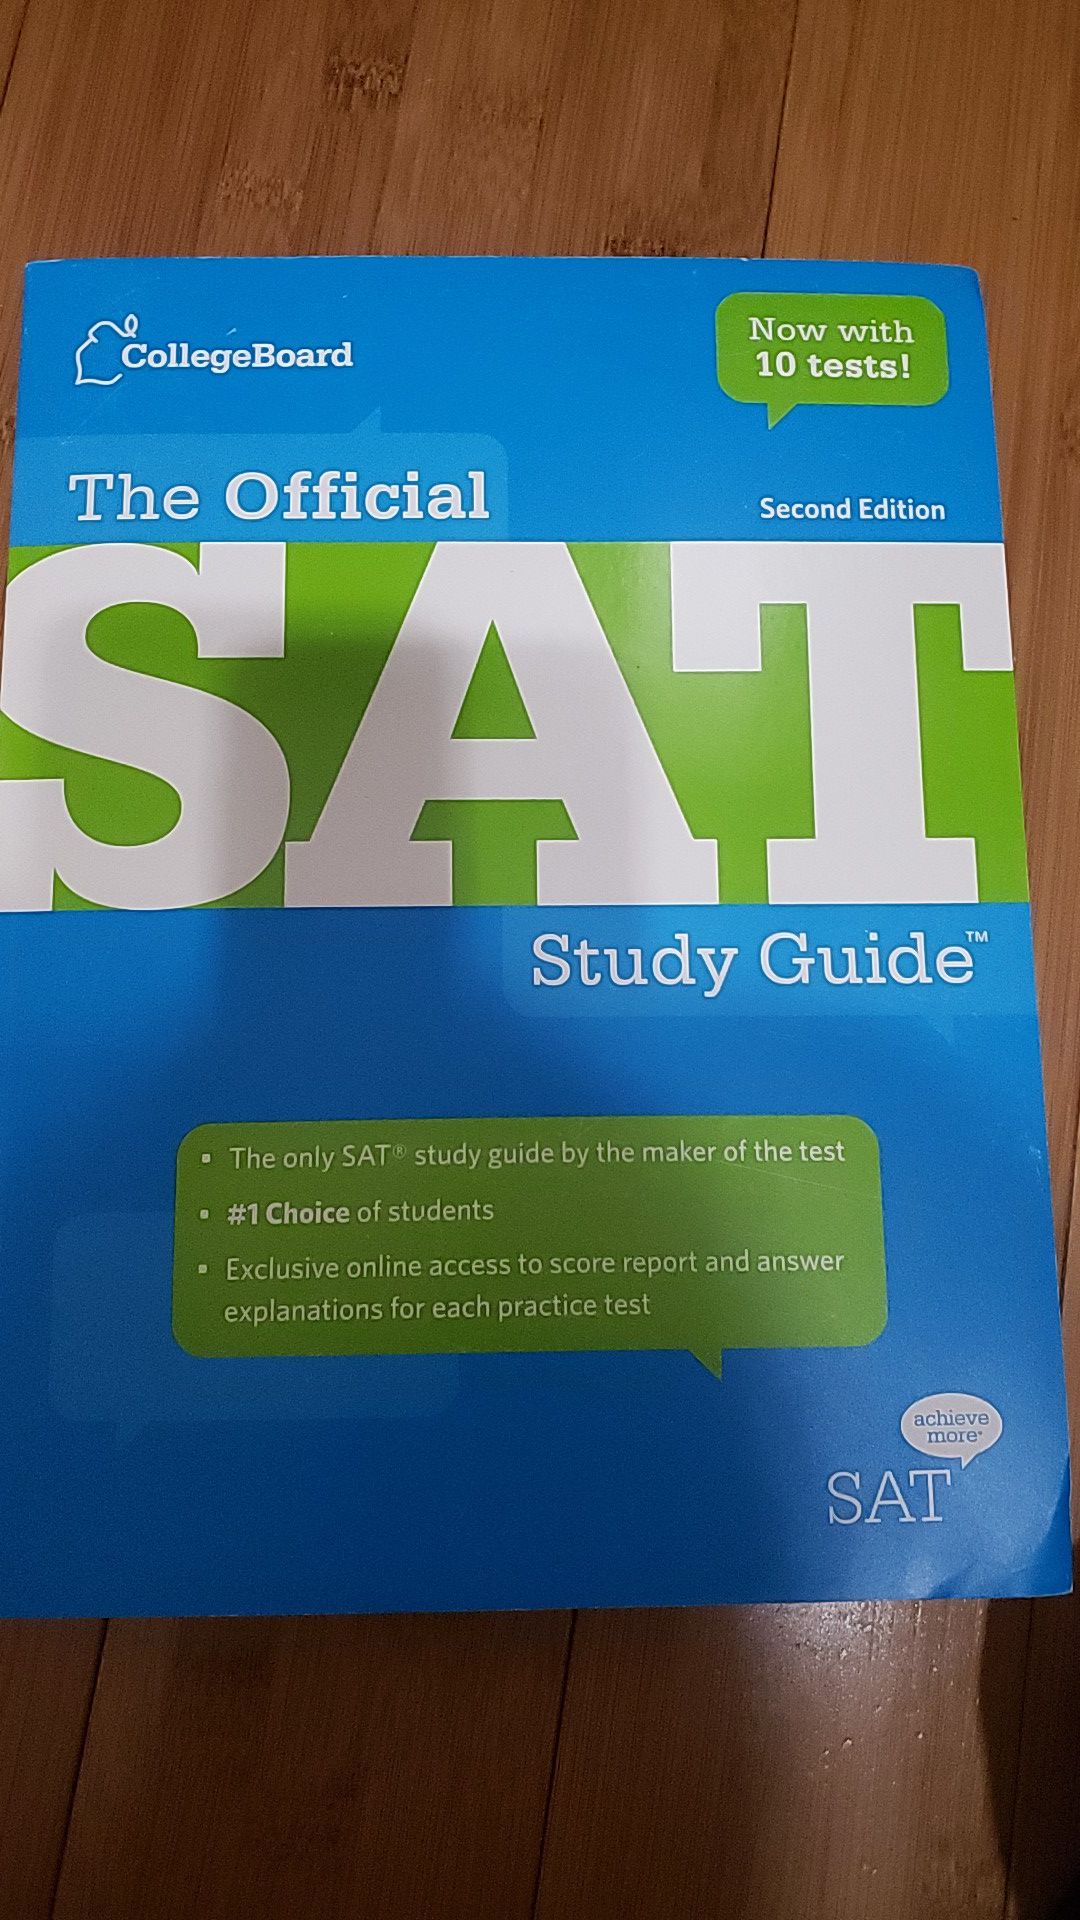 The Official SAT Study Guide Second (2nd) Edition by College Board